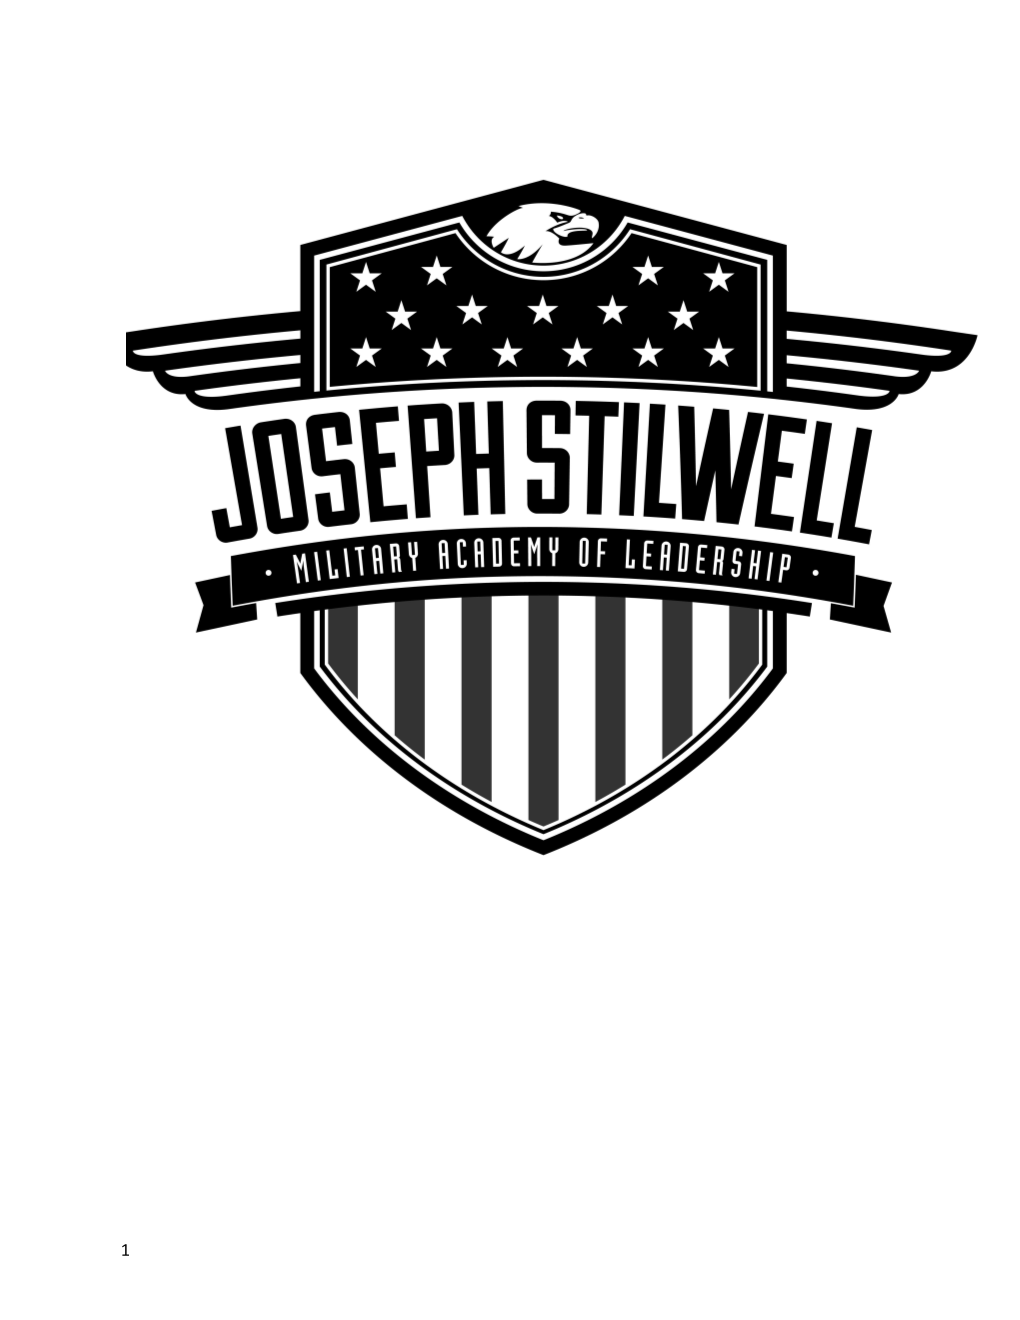 Welcome to Joseph Stilwell Military